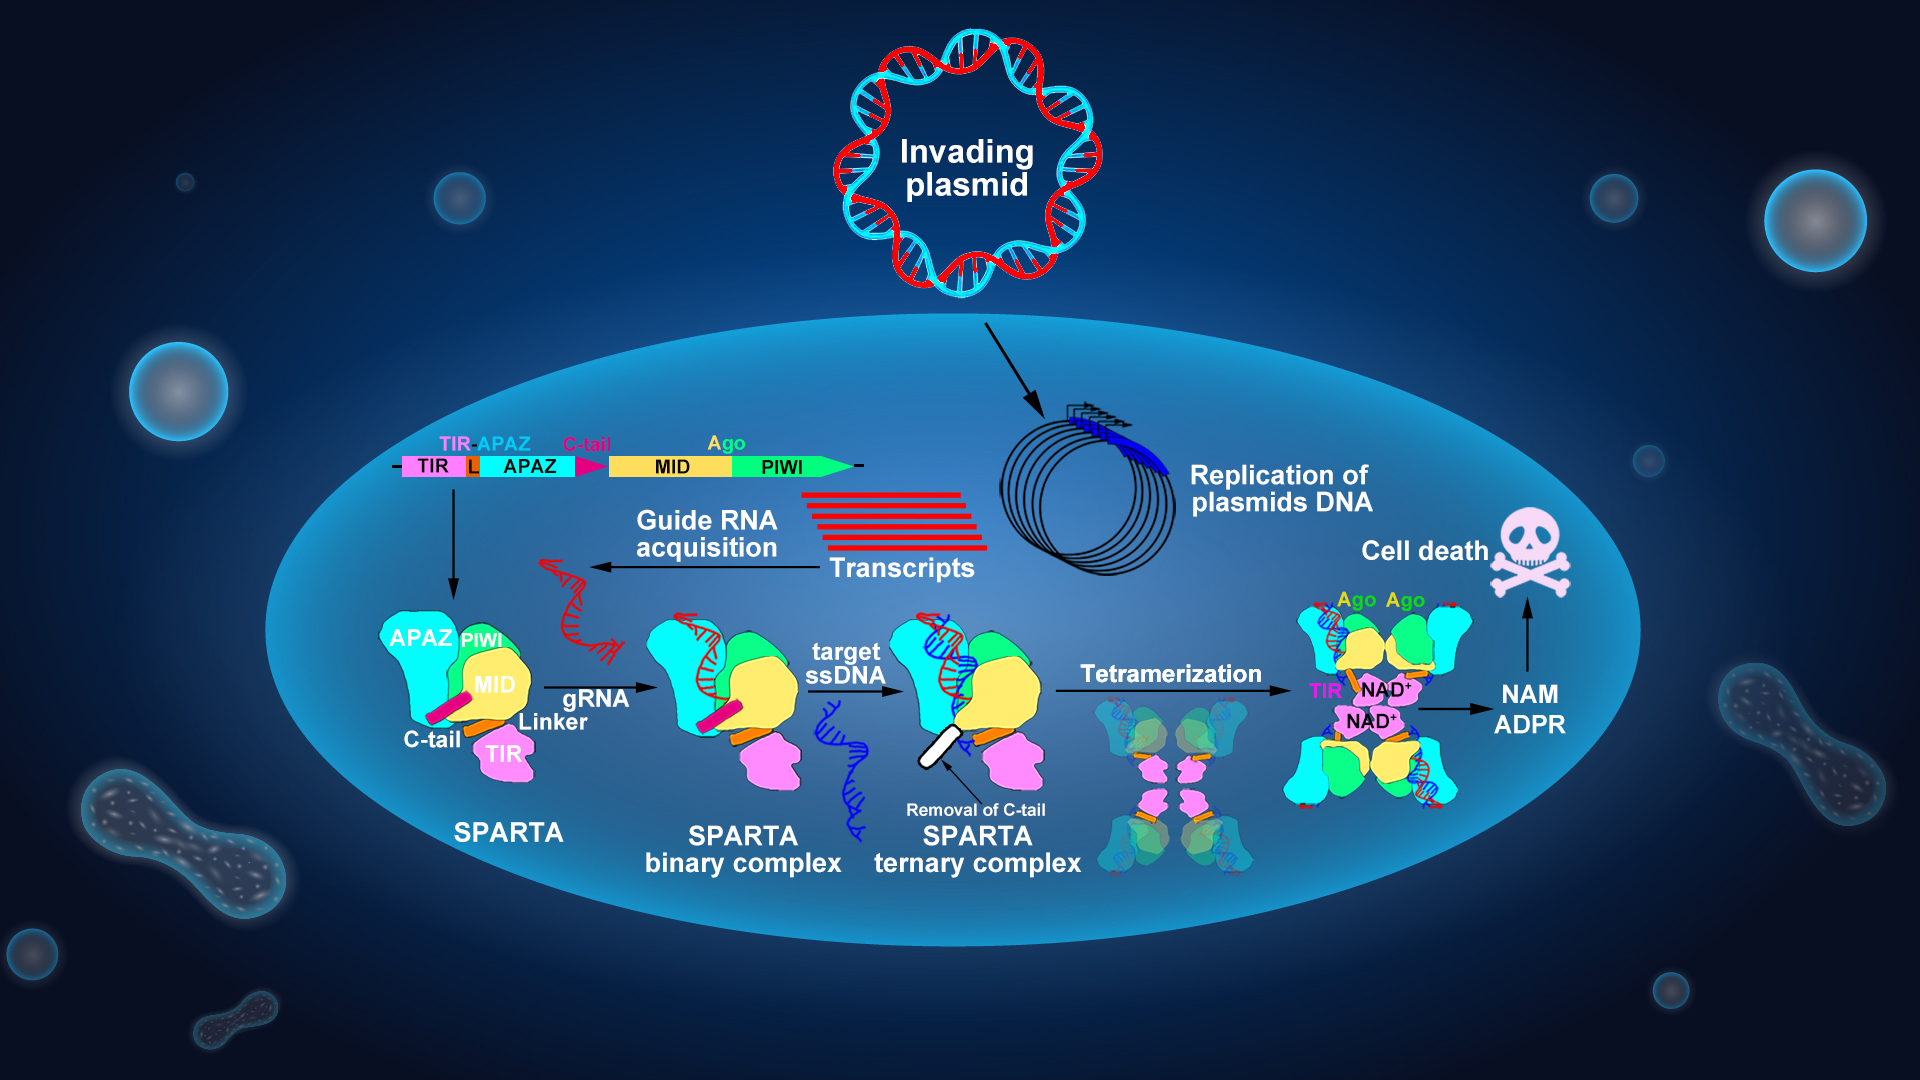 Researchers reveal molecular mechanism of ssDNA-activated NADase activity of prokaryotic SPARTA immune system